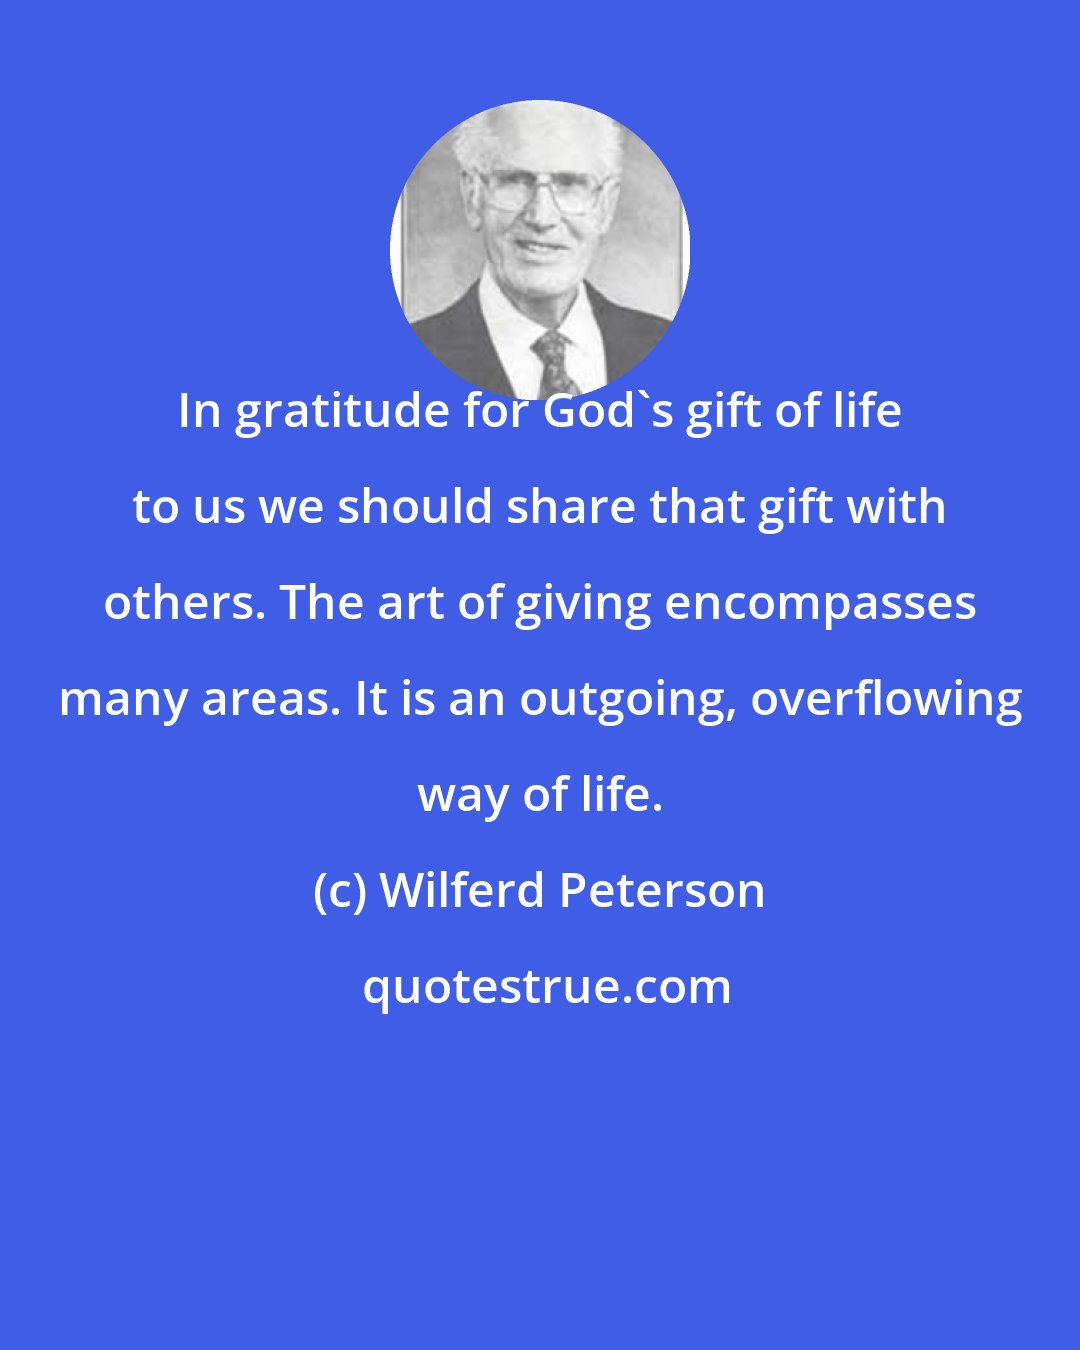 Wilferd Peterson: In gratitude for God's gift of life to us we should share that gift with others. The art of giving encompasses many areas. It is an outgoing, overflowing way of life.